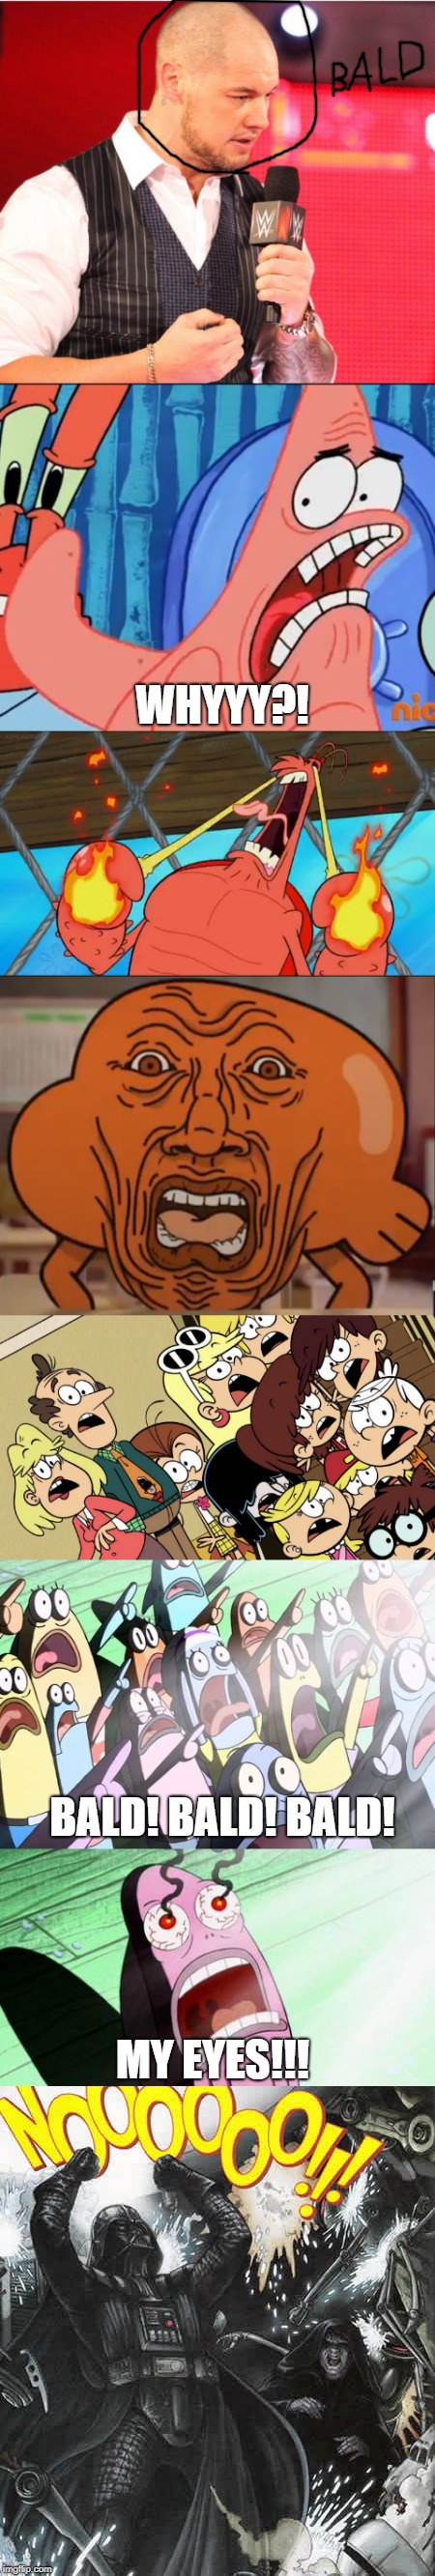 My reaction to Baron Corbin's frightening new look | WHYYY?! BALD! BALD! BALD! MY EYES!!! | image tagged in patrick star whyyy,the loud house,spongebob squarepants,the amazing world of gumball,wwe,star wars no | made w/ Imgflip meme maker